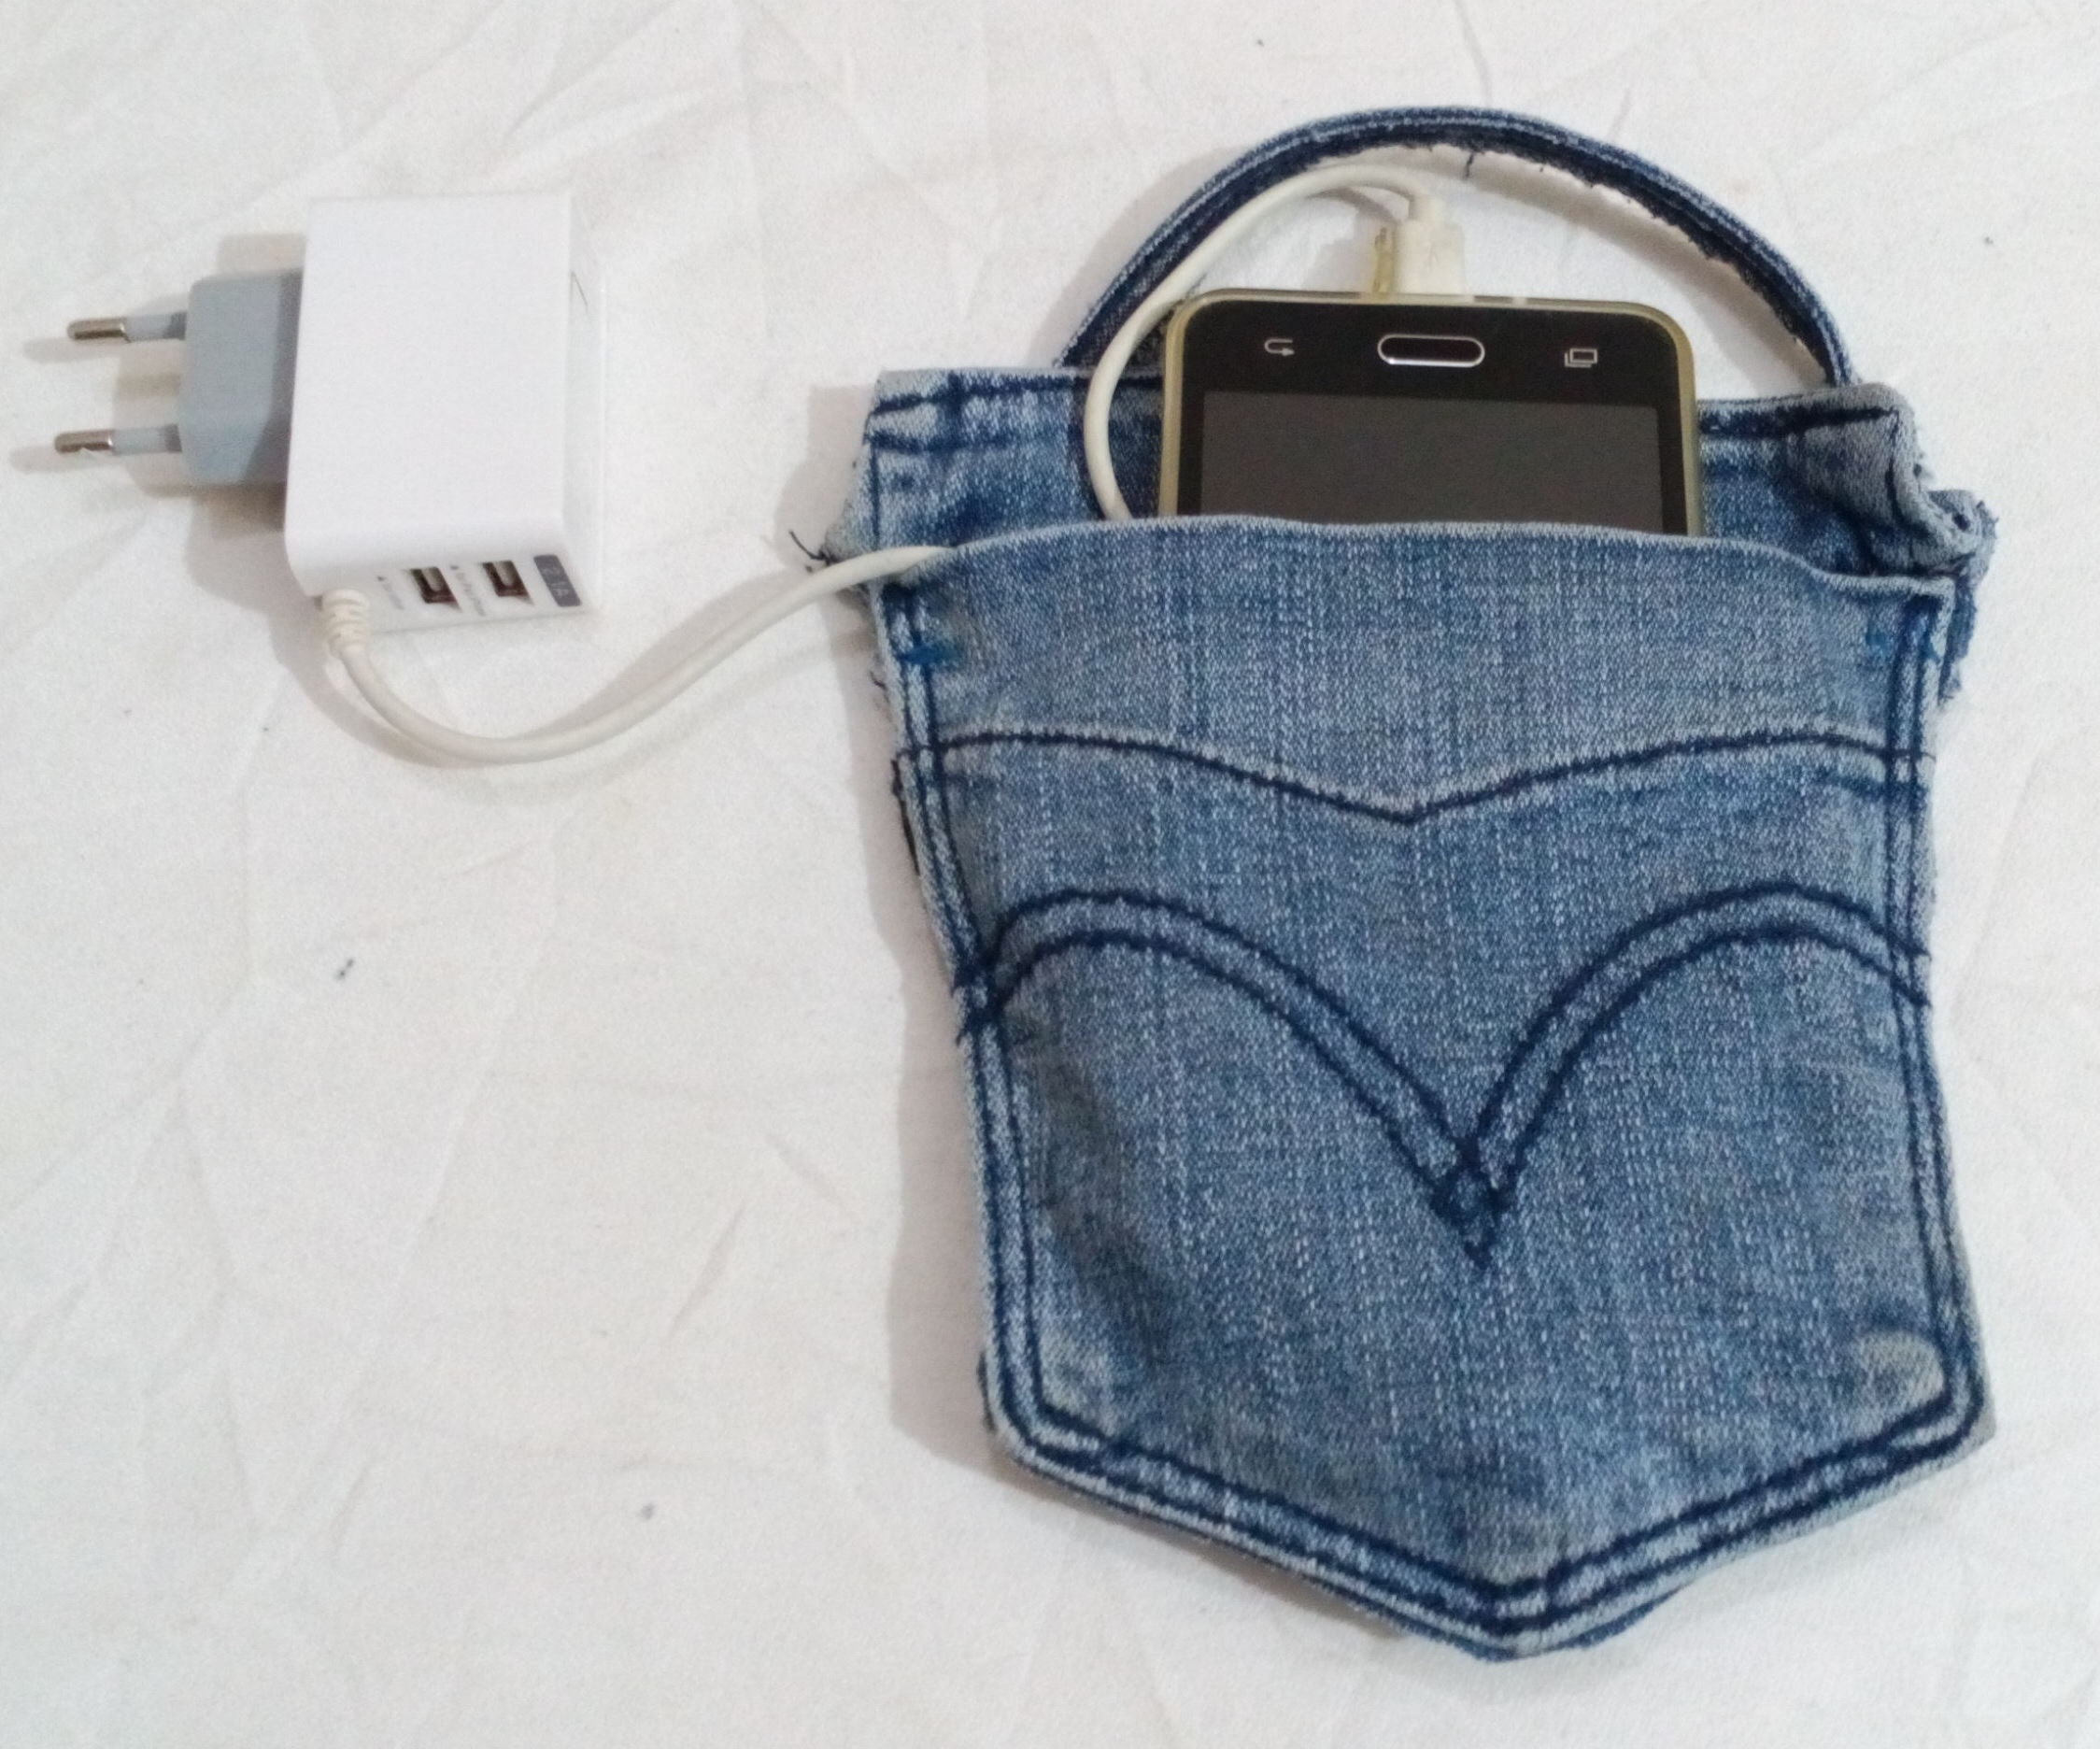 Make Charging Cell Phone Holder From Old Jeans